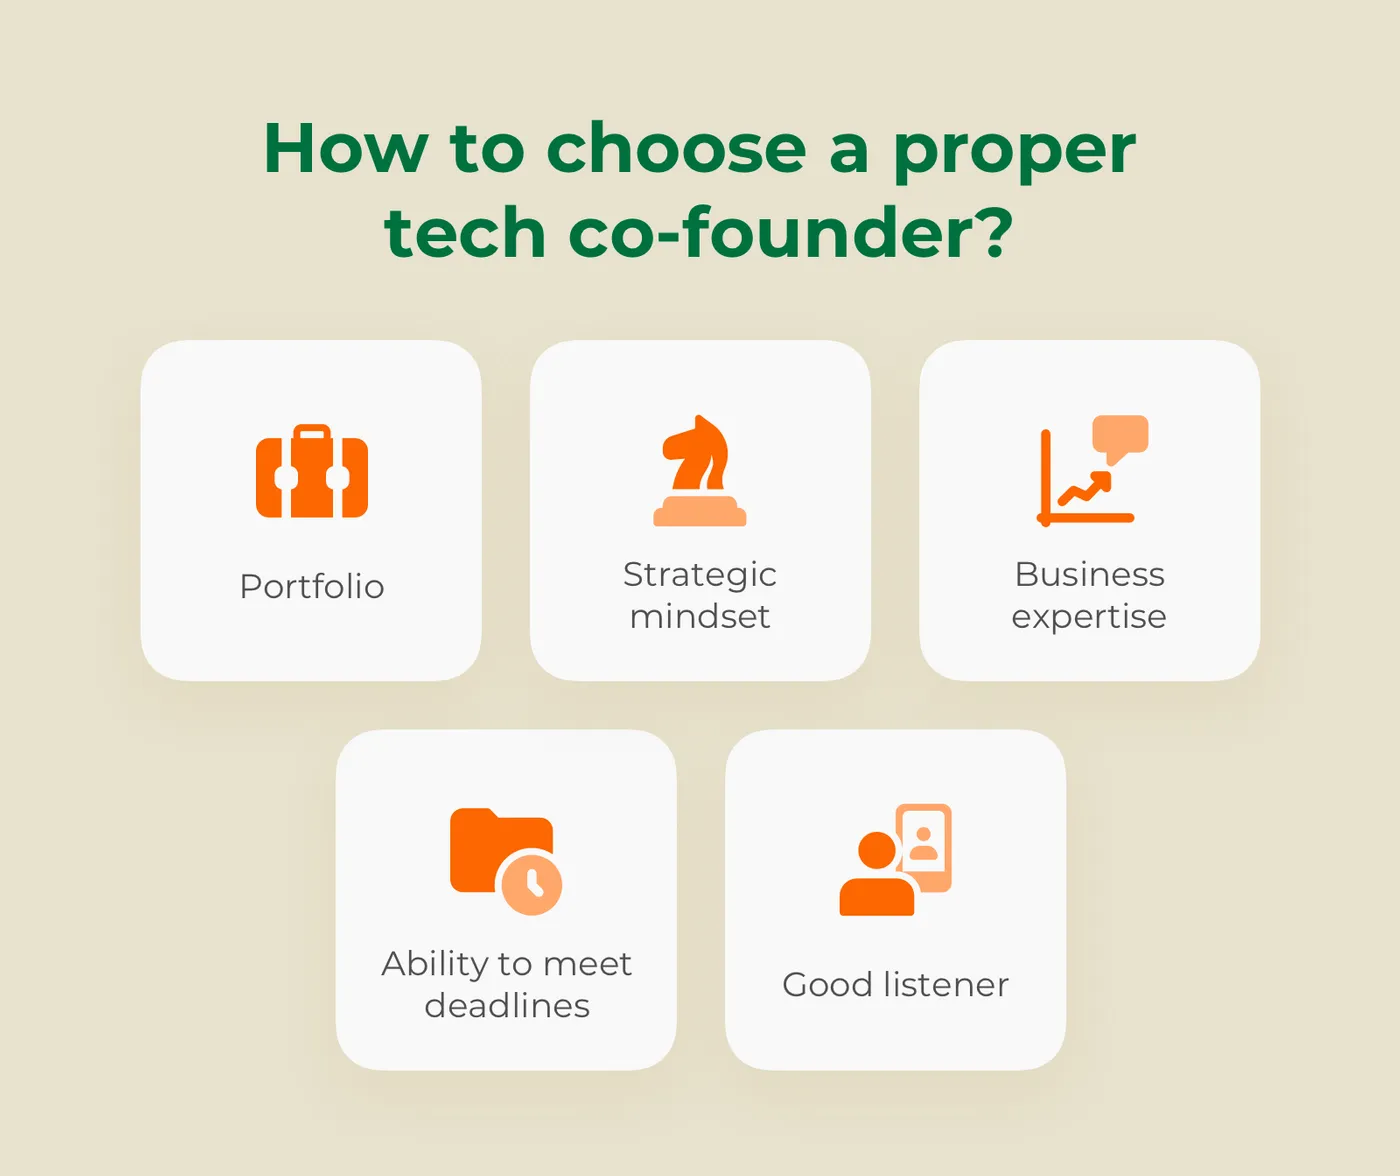 Tech co-founders' skills